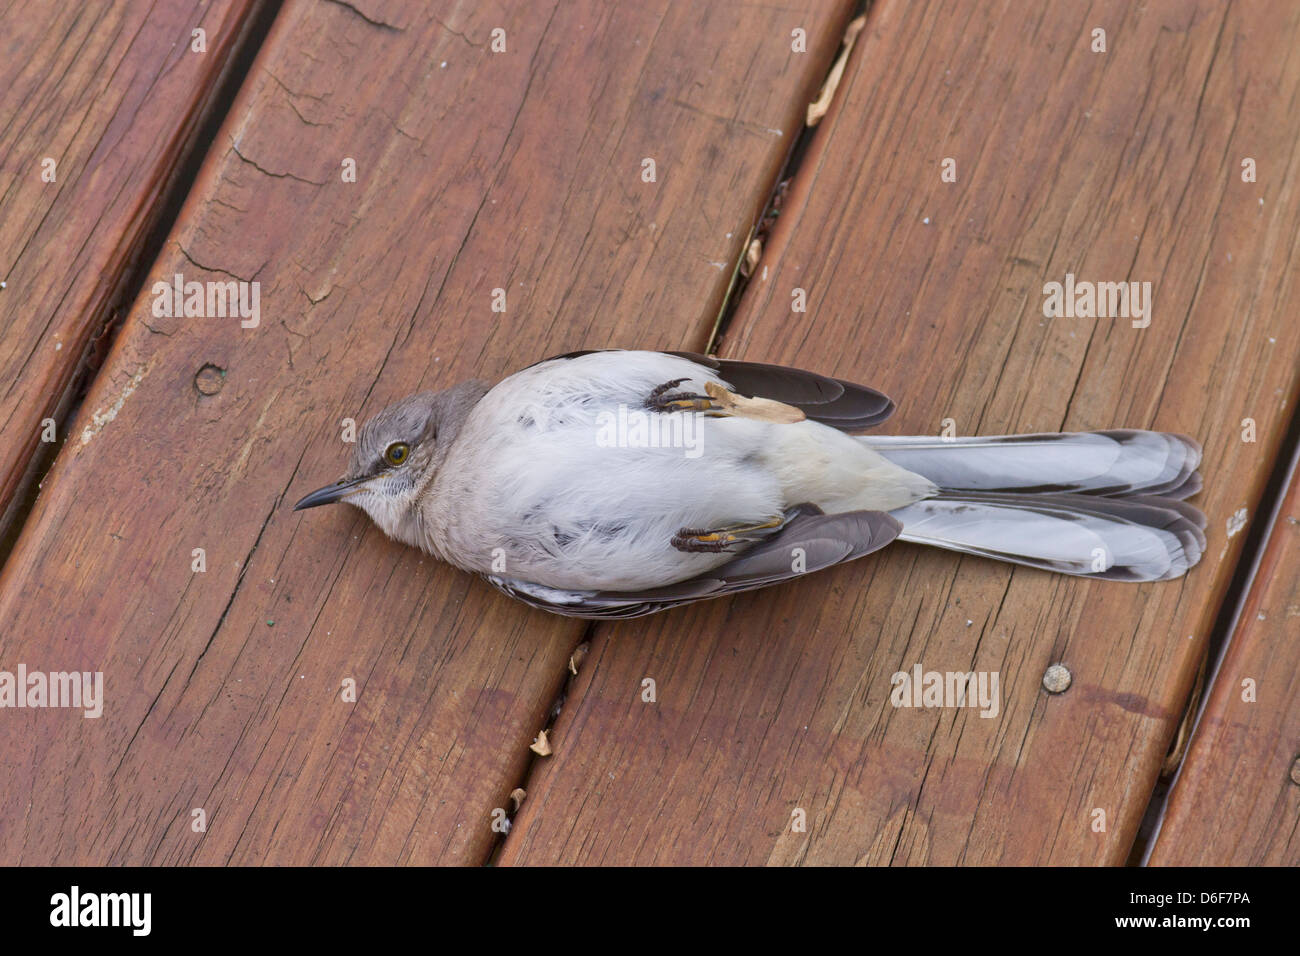 Close up of a stunned bird that is lying on its back on a wooden deck appearing dead (but later flew off) Stock Photo